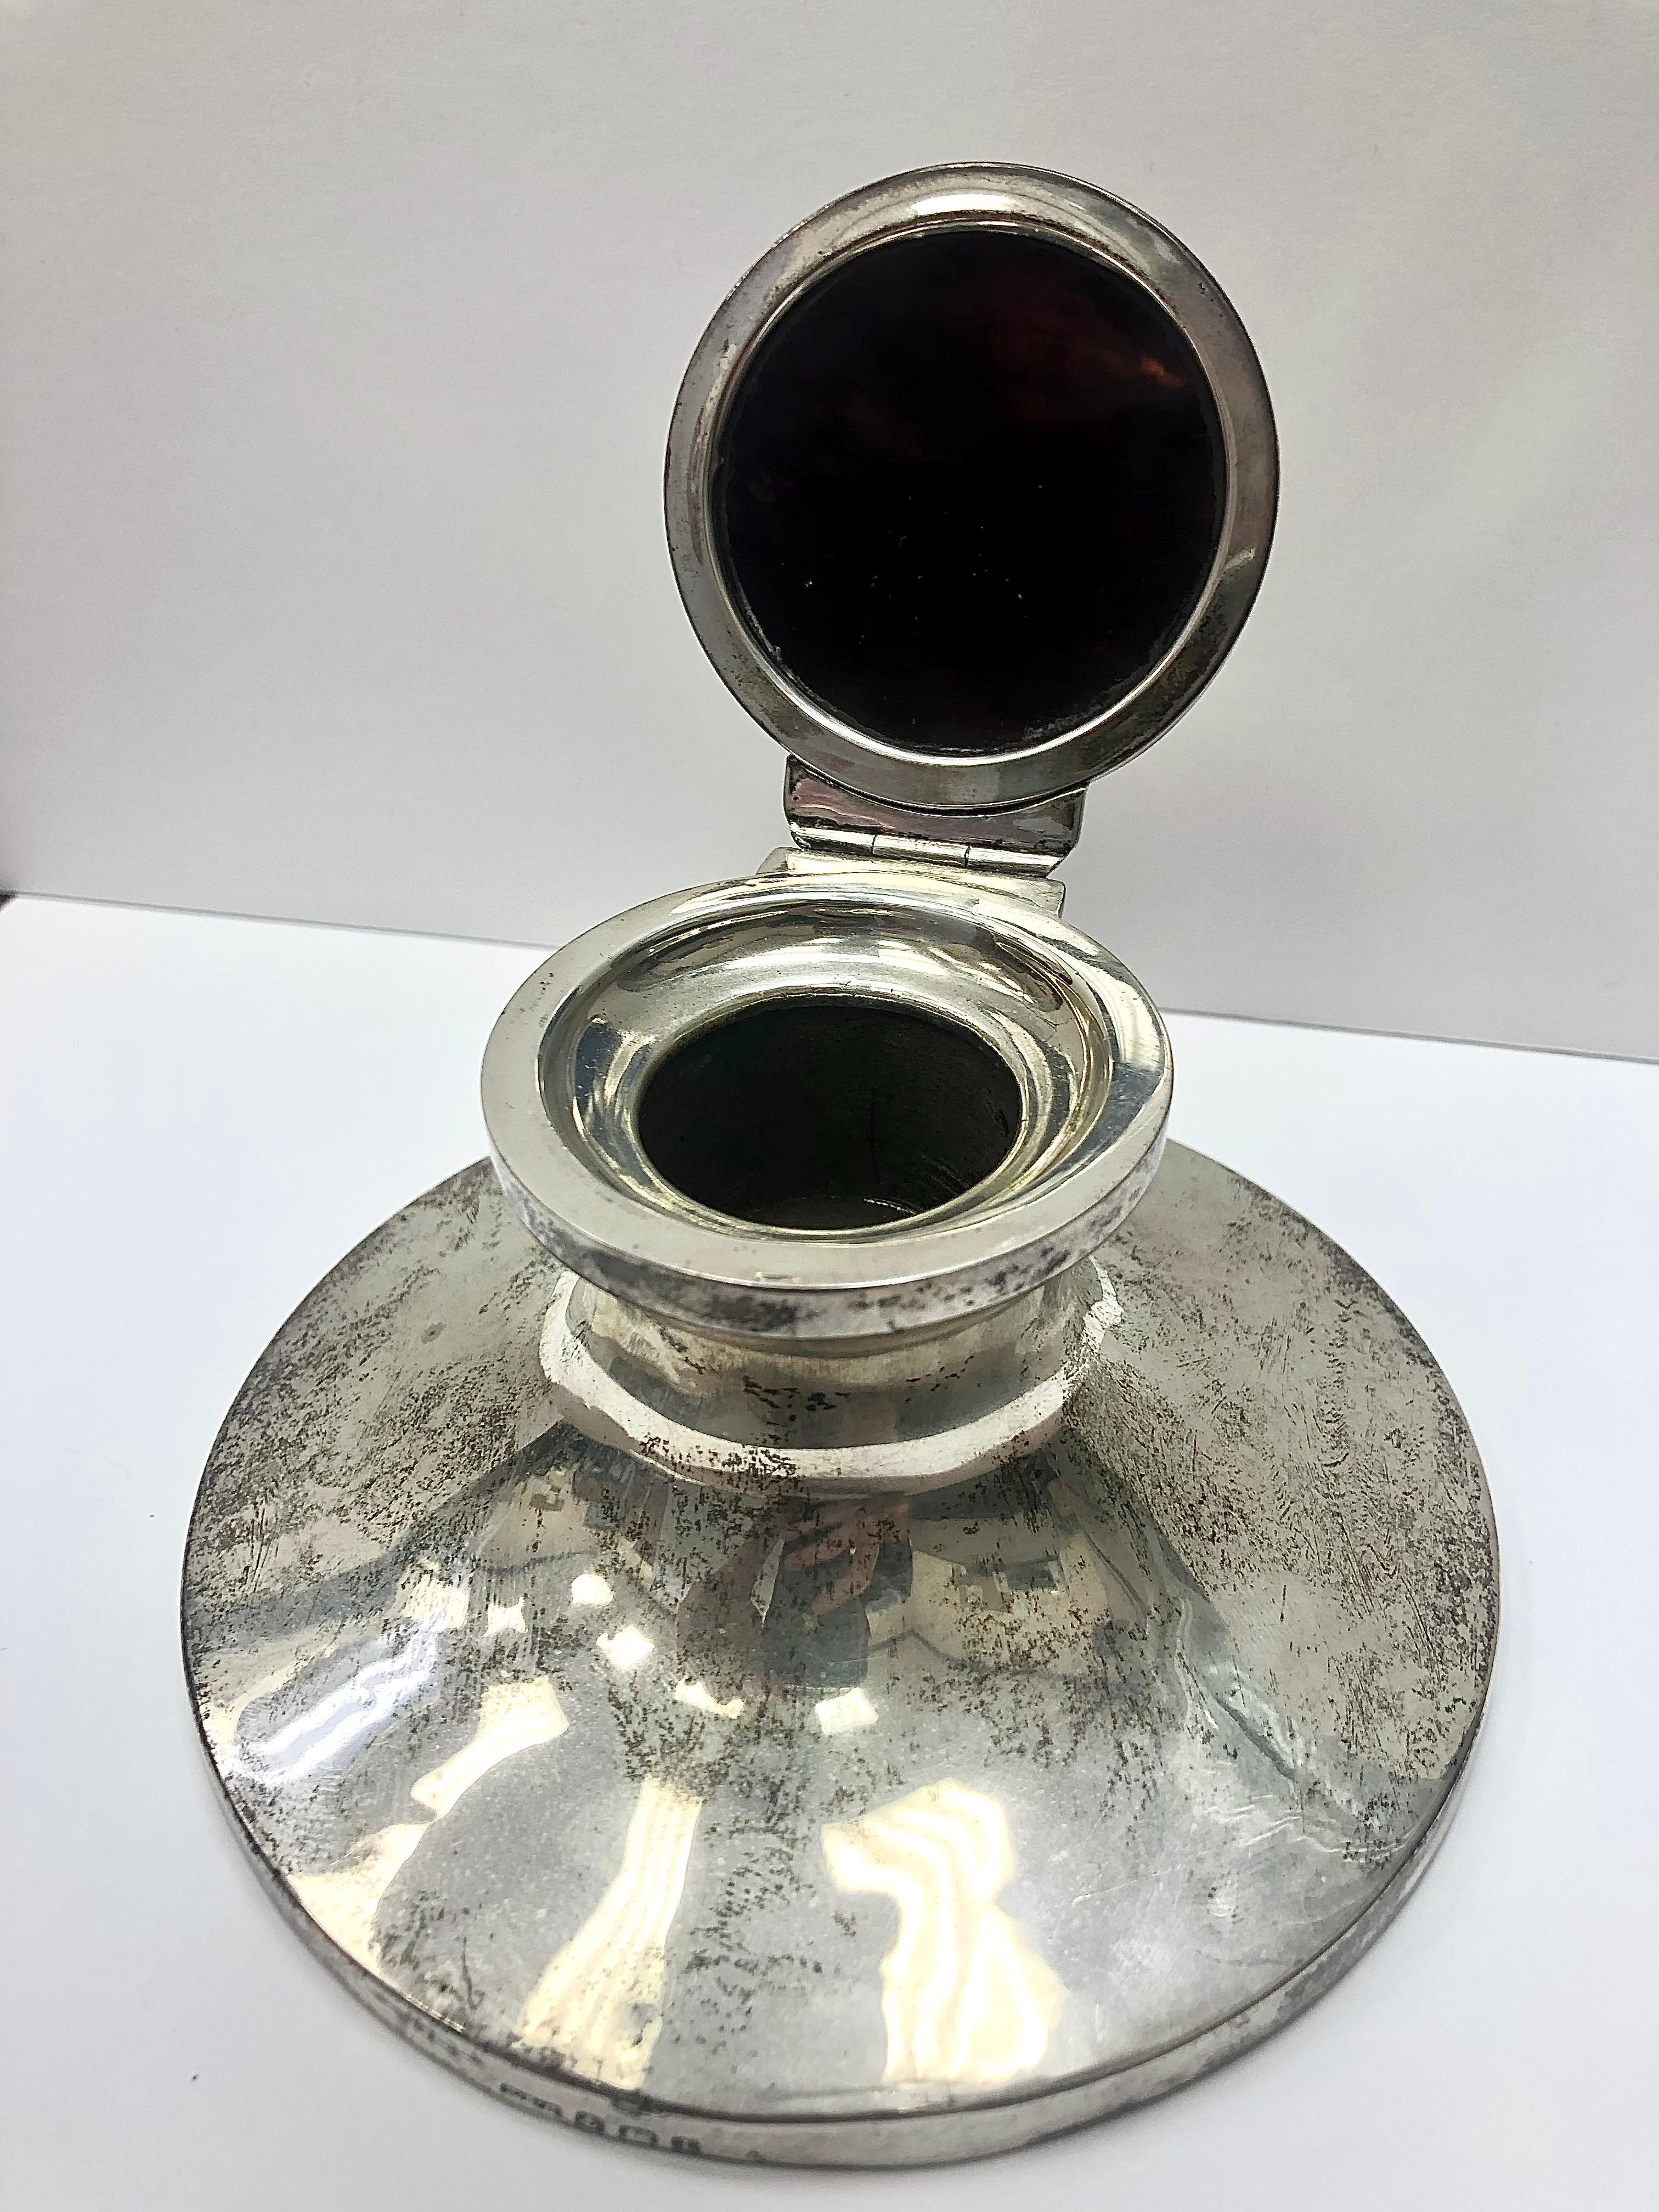 Stunning sterling silver inkwell with an inlaid tortoise shell lid. Circa 1912. Glass liner is missing.